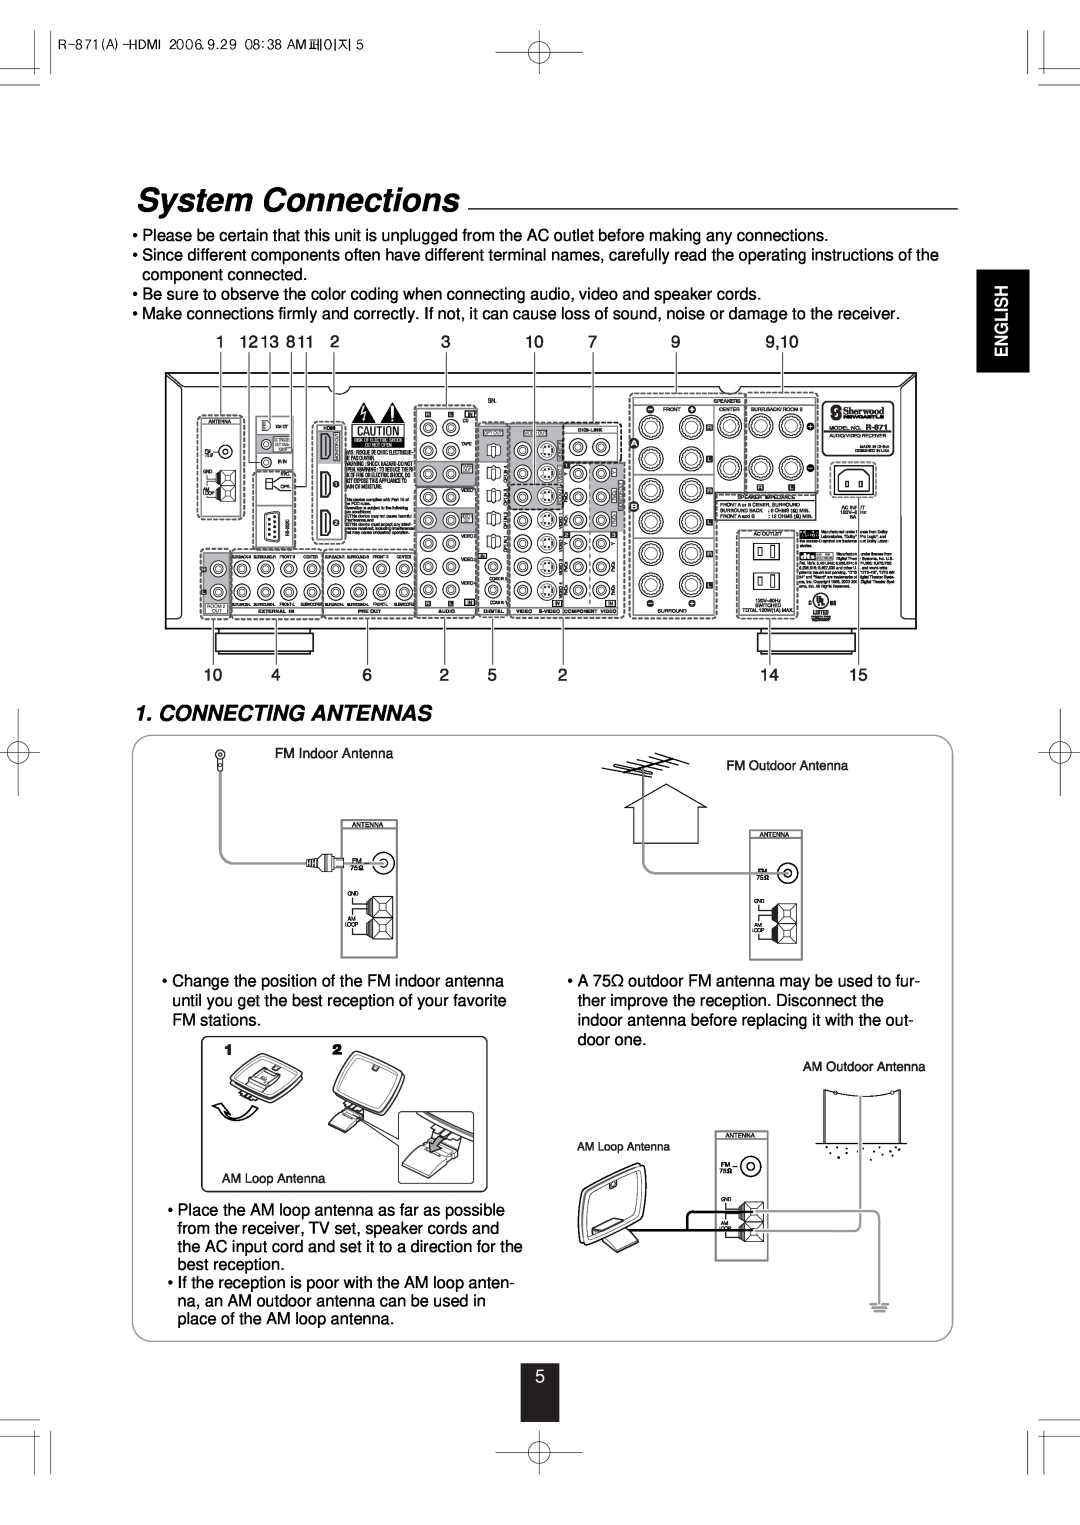 Sherwood R-871 manual System Connections, Connecting Antennas, English 